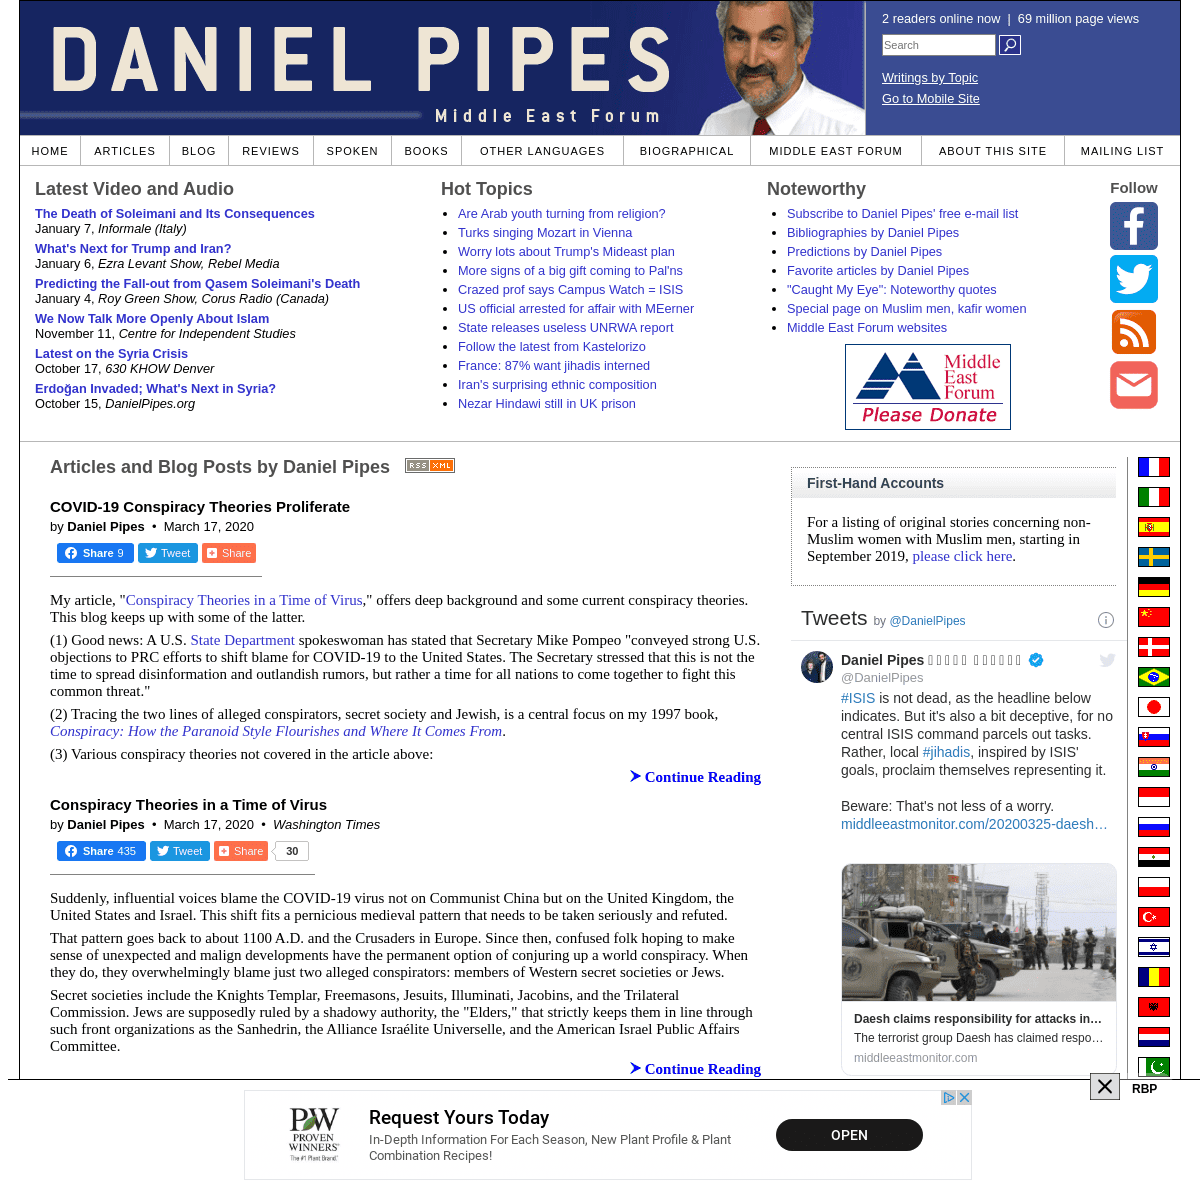 A complete backup of danielpipes.org